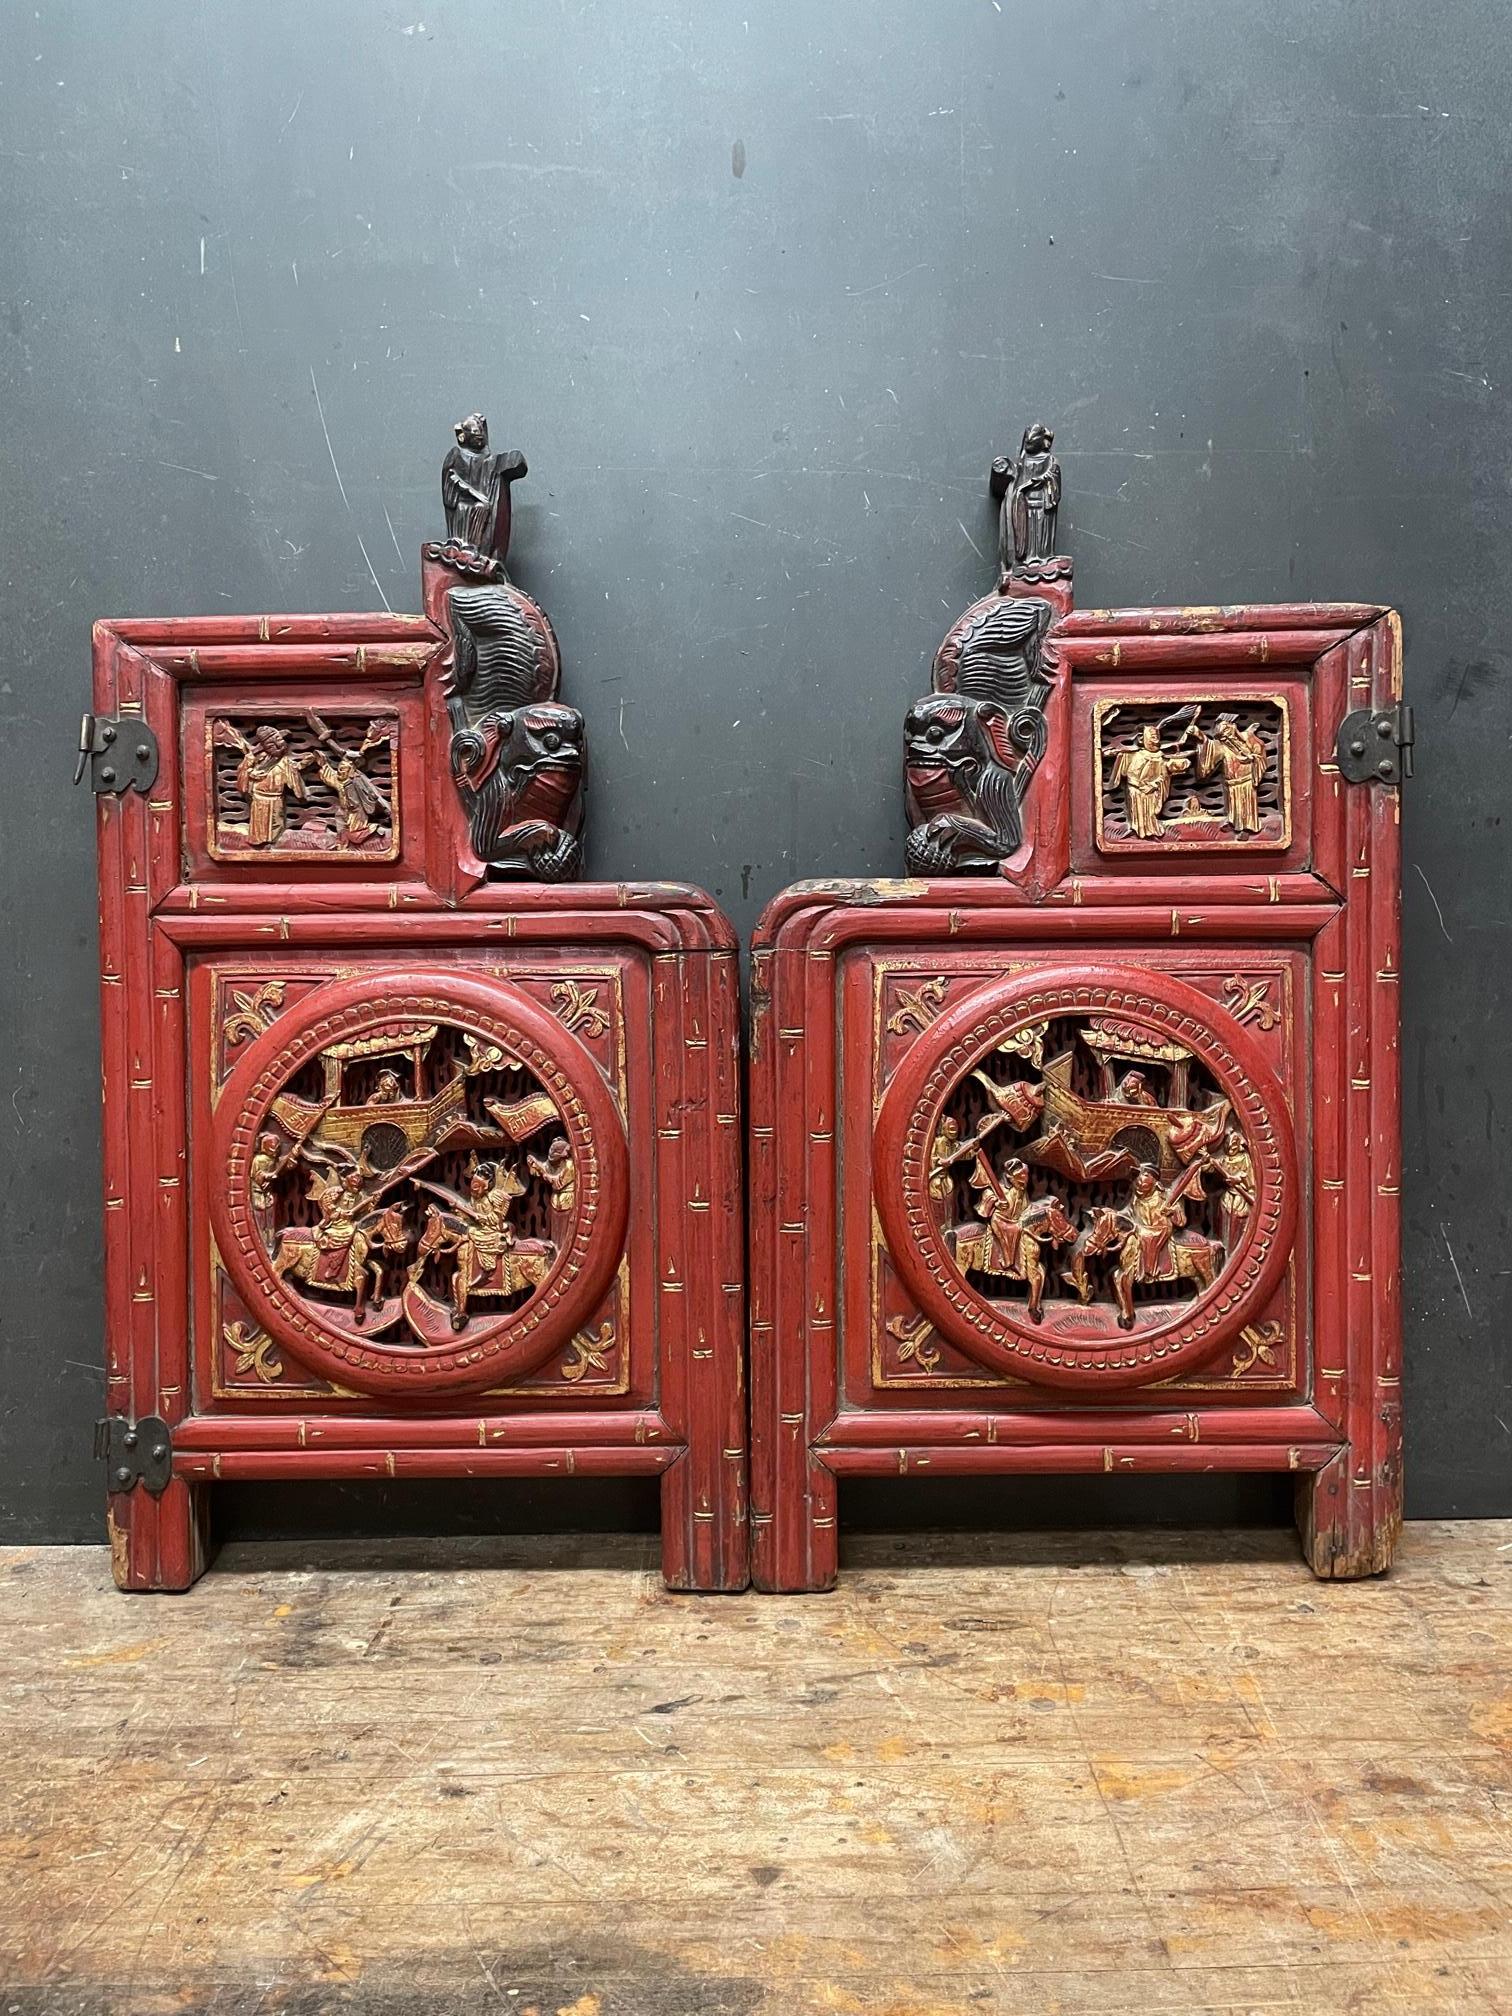 Removed Antique Asian Cabinet Doors. Heavily worn corners and edges, missing finish. One door has only a single hinge remaining.

W 14 5/8 x H 26 5/8 x D 2 in.
 